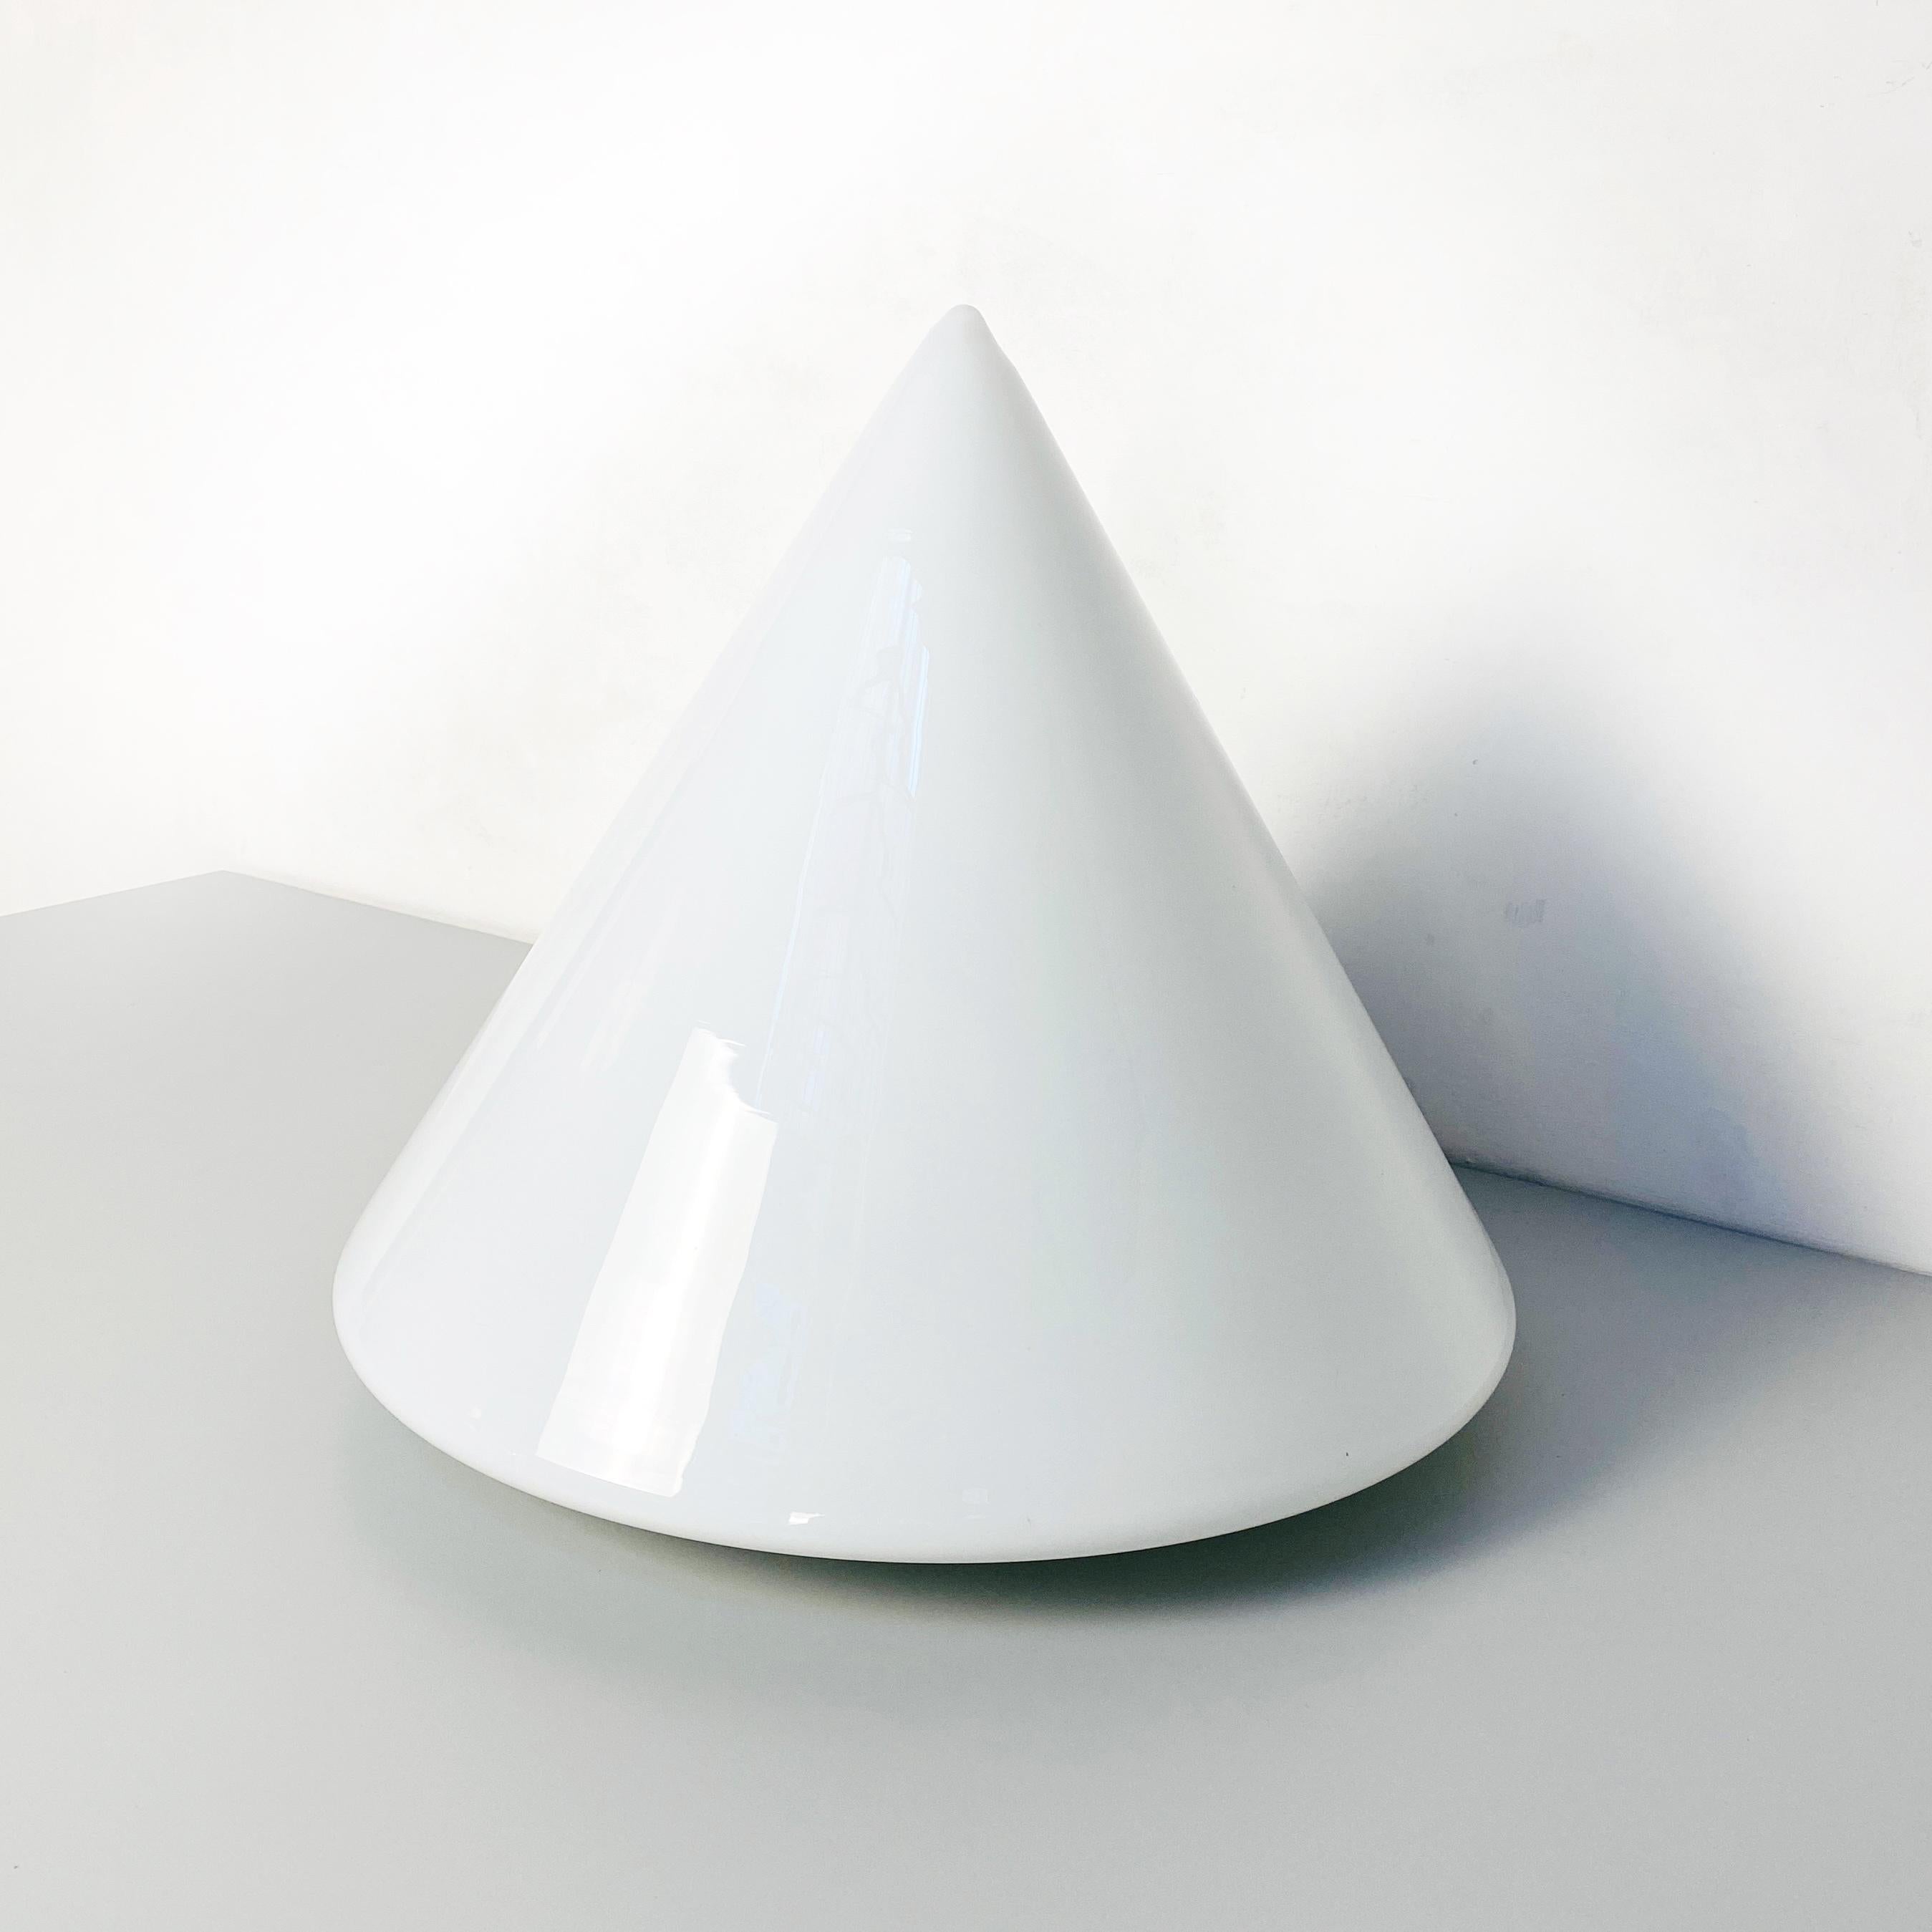 Italian Mid-Century Modern Conical Table Lamp with Double Opal Glass, 1970s For Sale 1